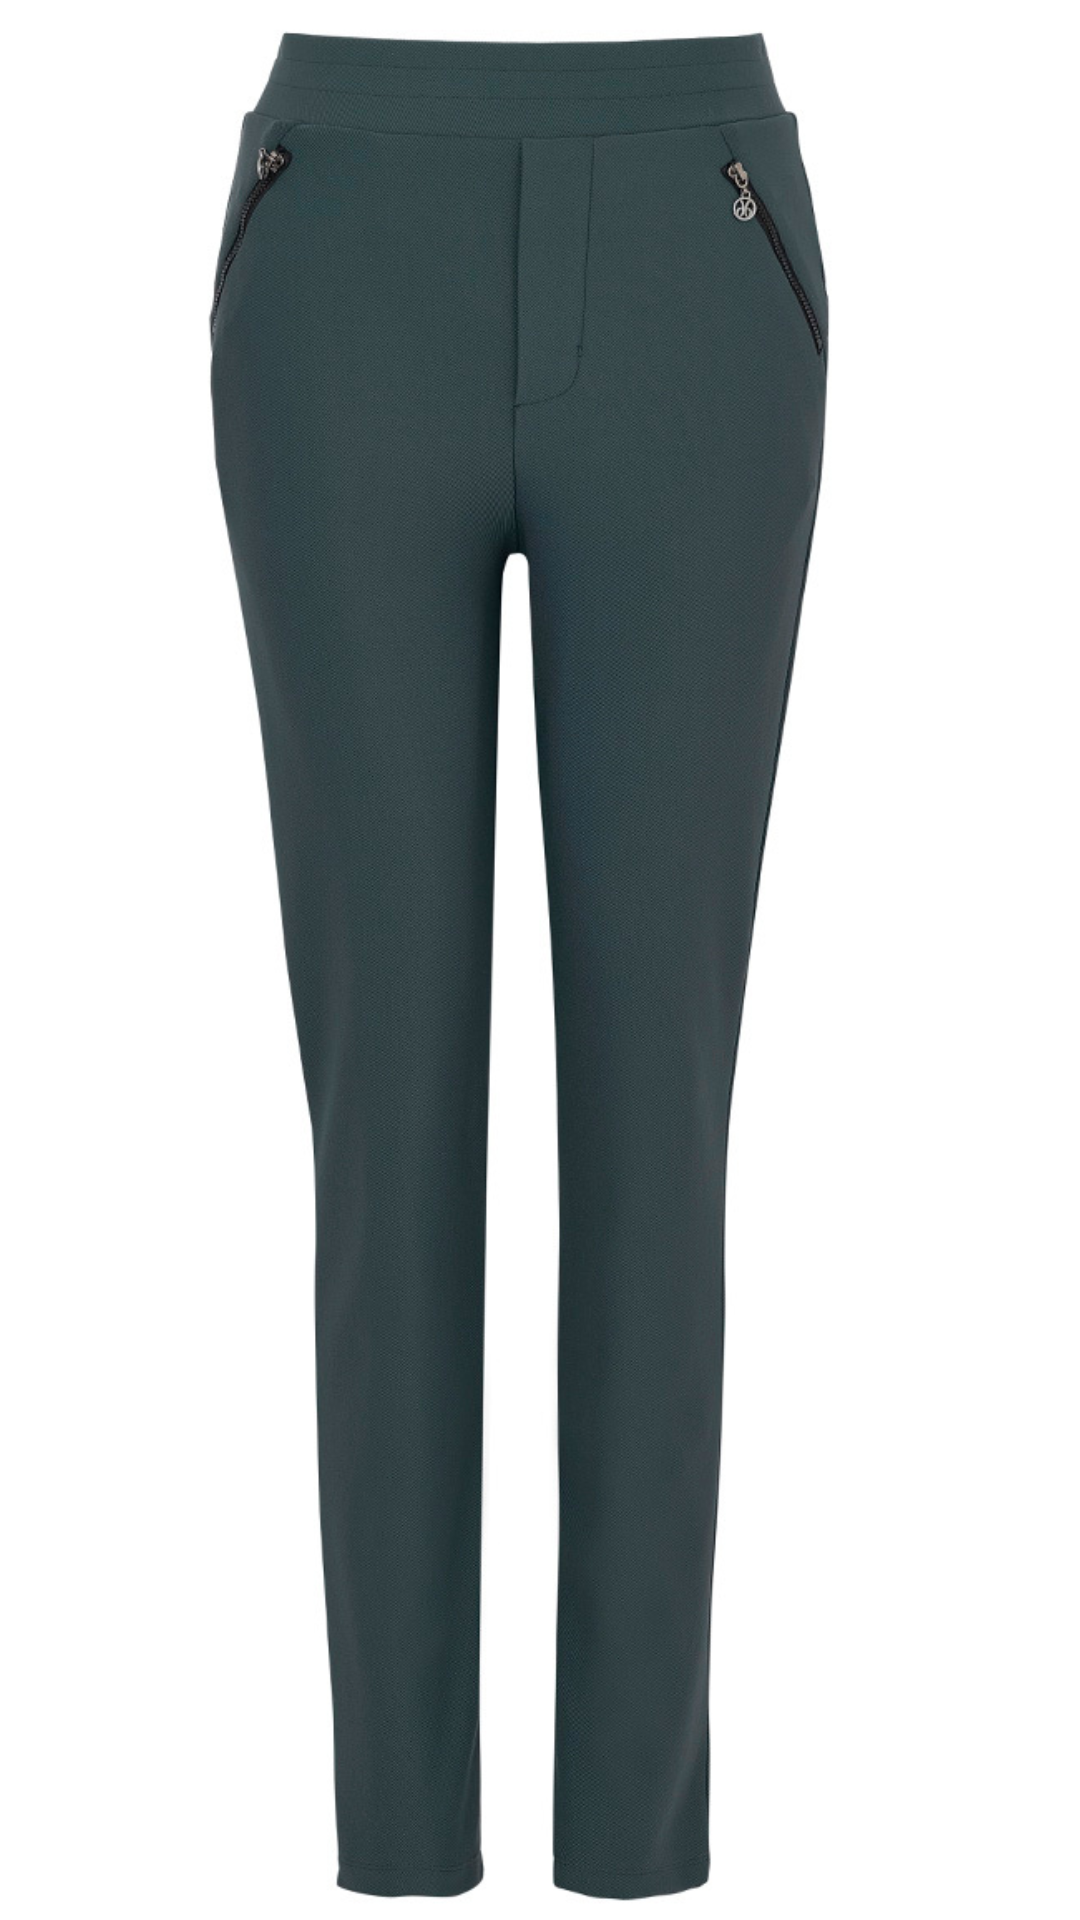 Woven Stretch Zippered Pocket Pant. Style DOLC73422